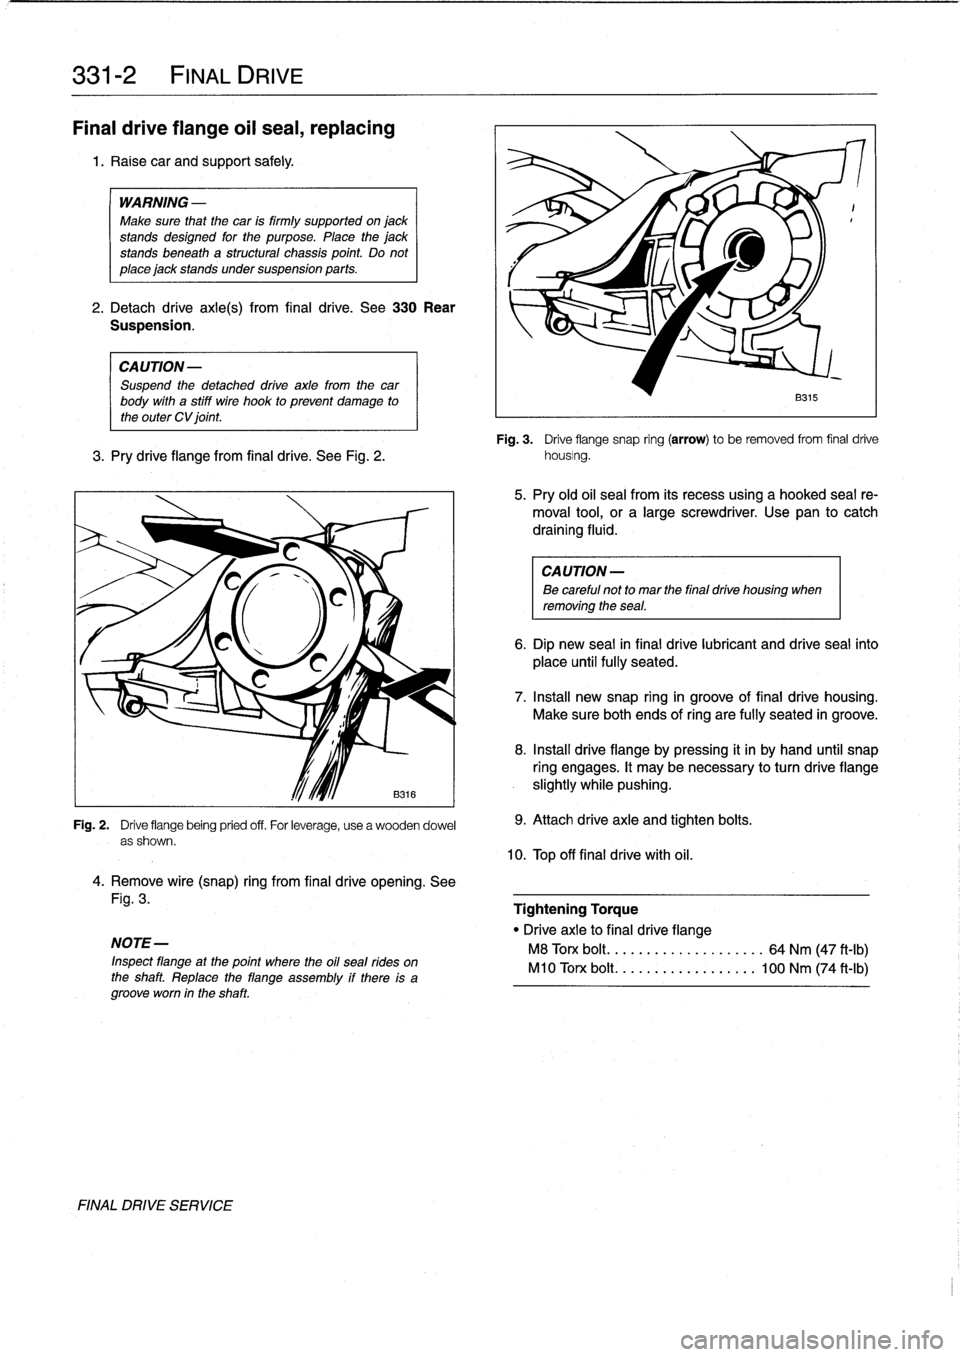 BMW M3 1993 E36 Owners Guide 
331-2

	

FINAL
DRIVE

Make
sure
that
the
car
is
firm1y
supportedon
Tjack

.
.-

	

"
:
.-

	

:
.
n

	

-

2
.
Detach
drive
axle(s)
from
final
drive
.
See330
Rear

Suspension
.

CA
UTION-

Suspend
t